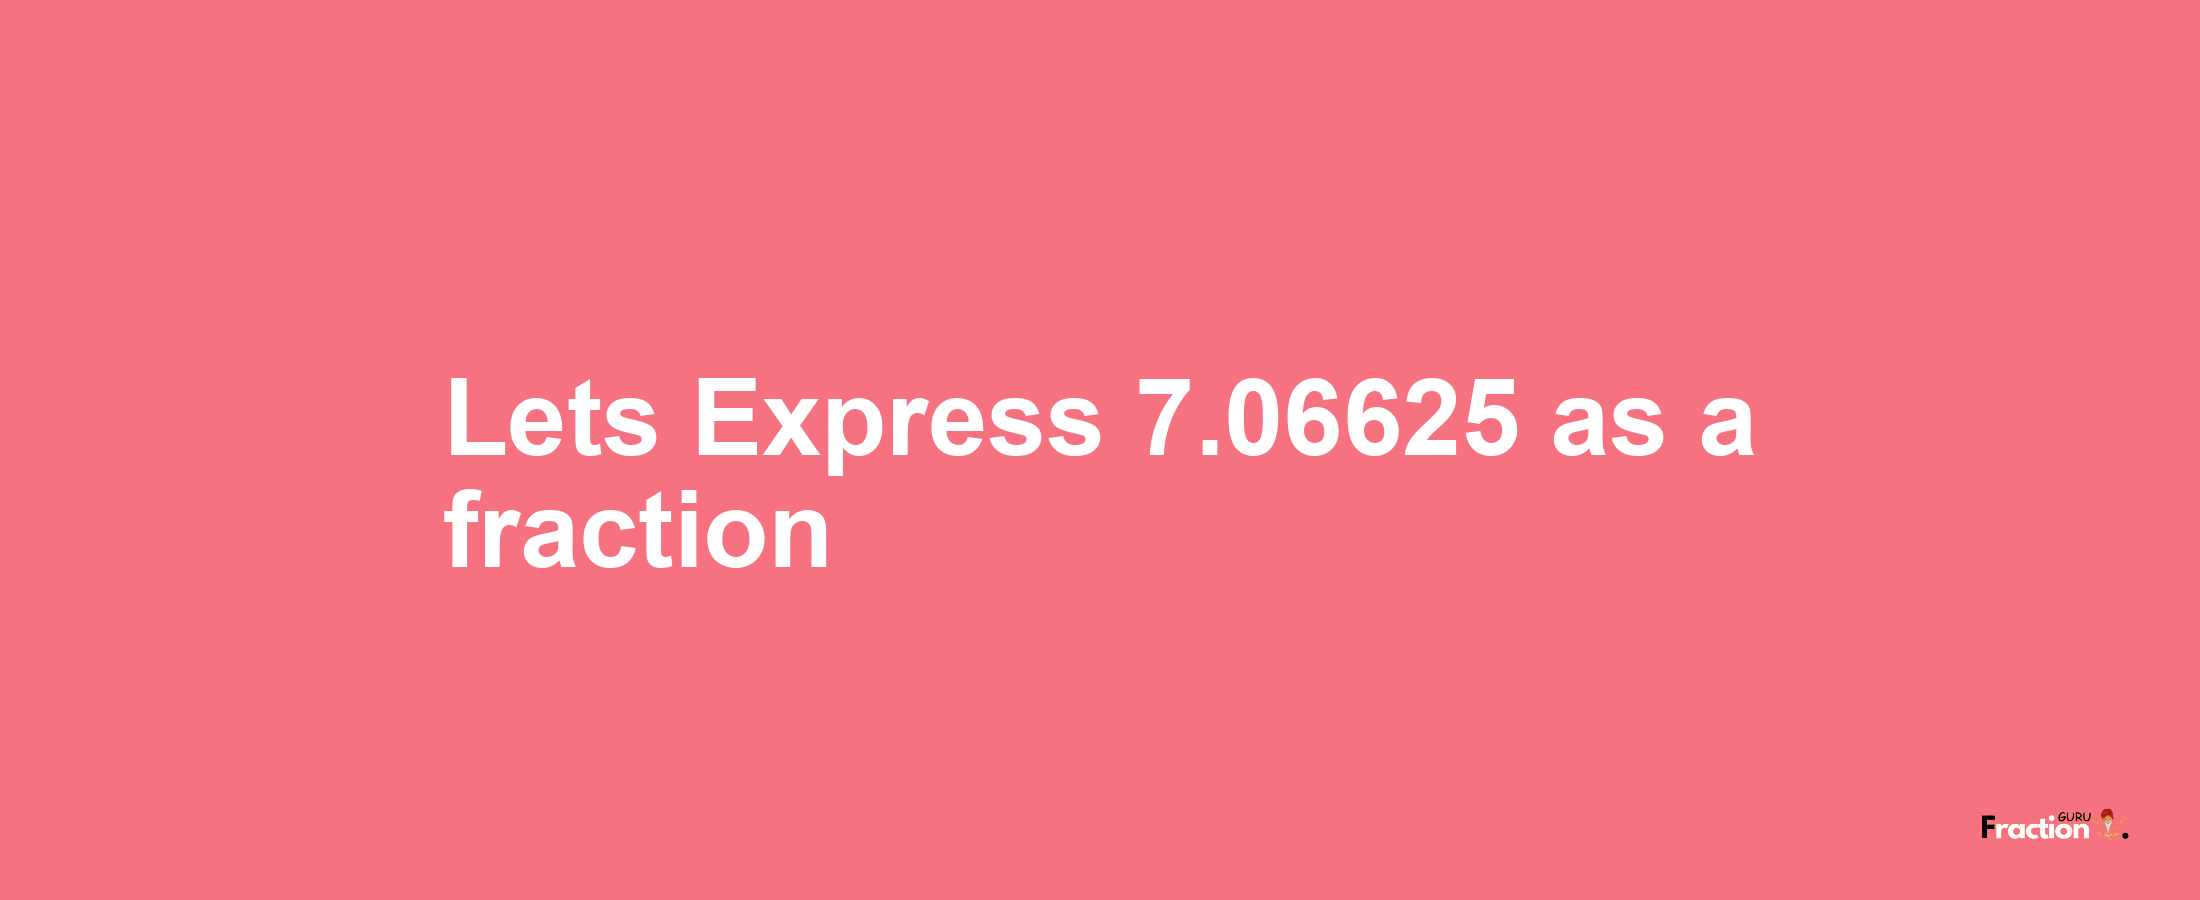 Lets Express 7.06625 as afraction